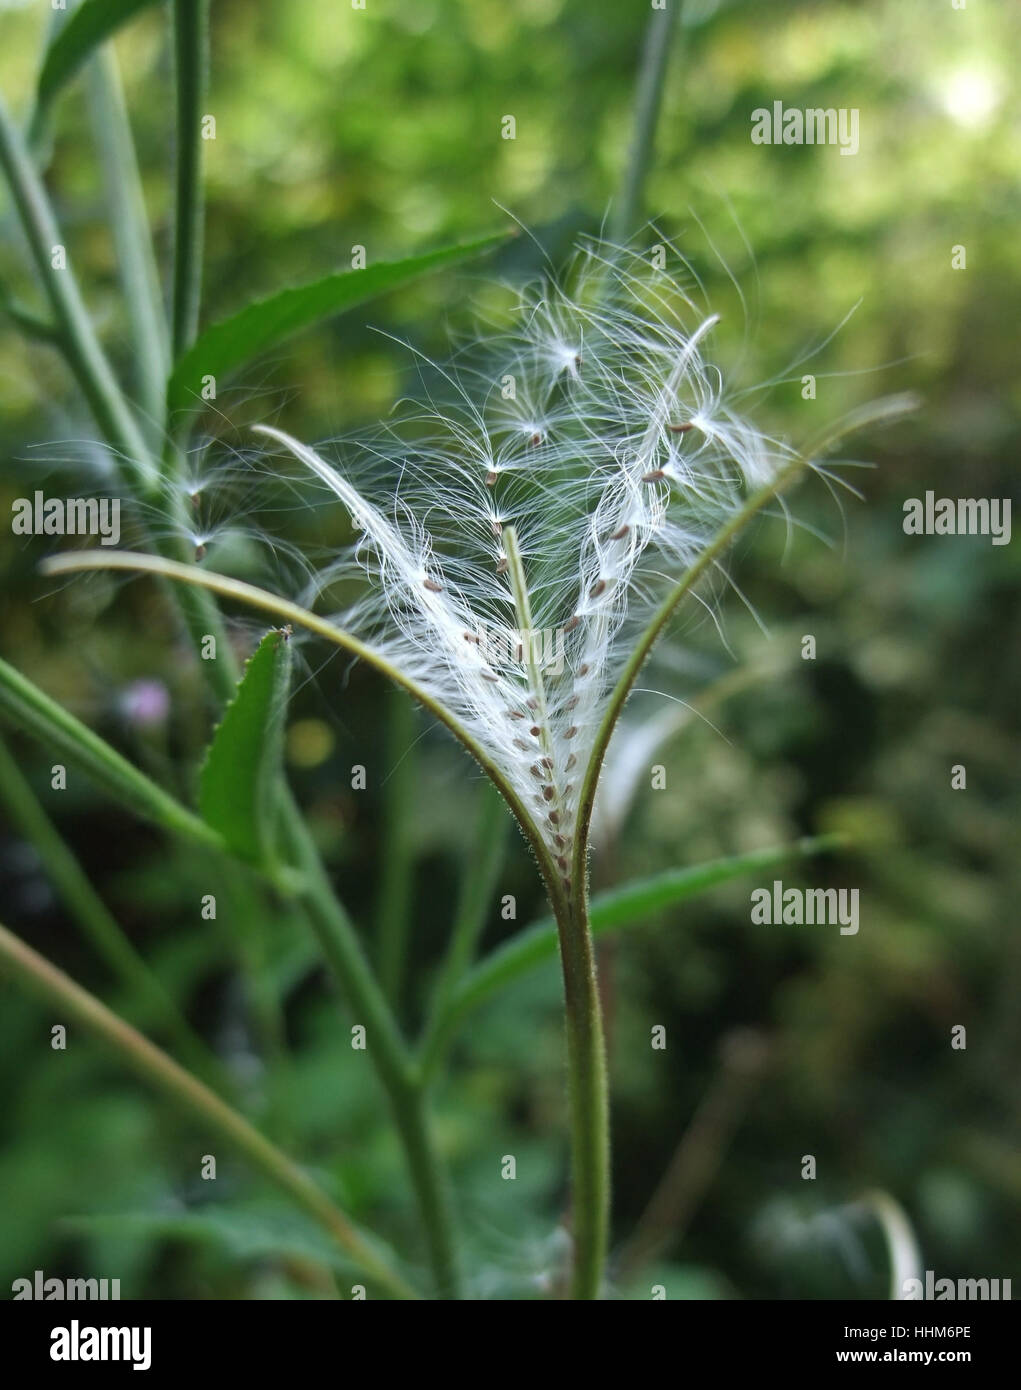 beautiful filigree plant detail in blurry natural back at summer time Stock Photo